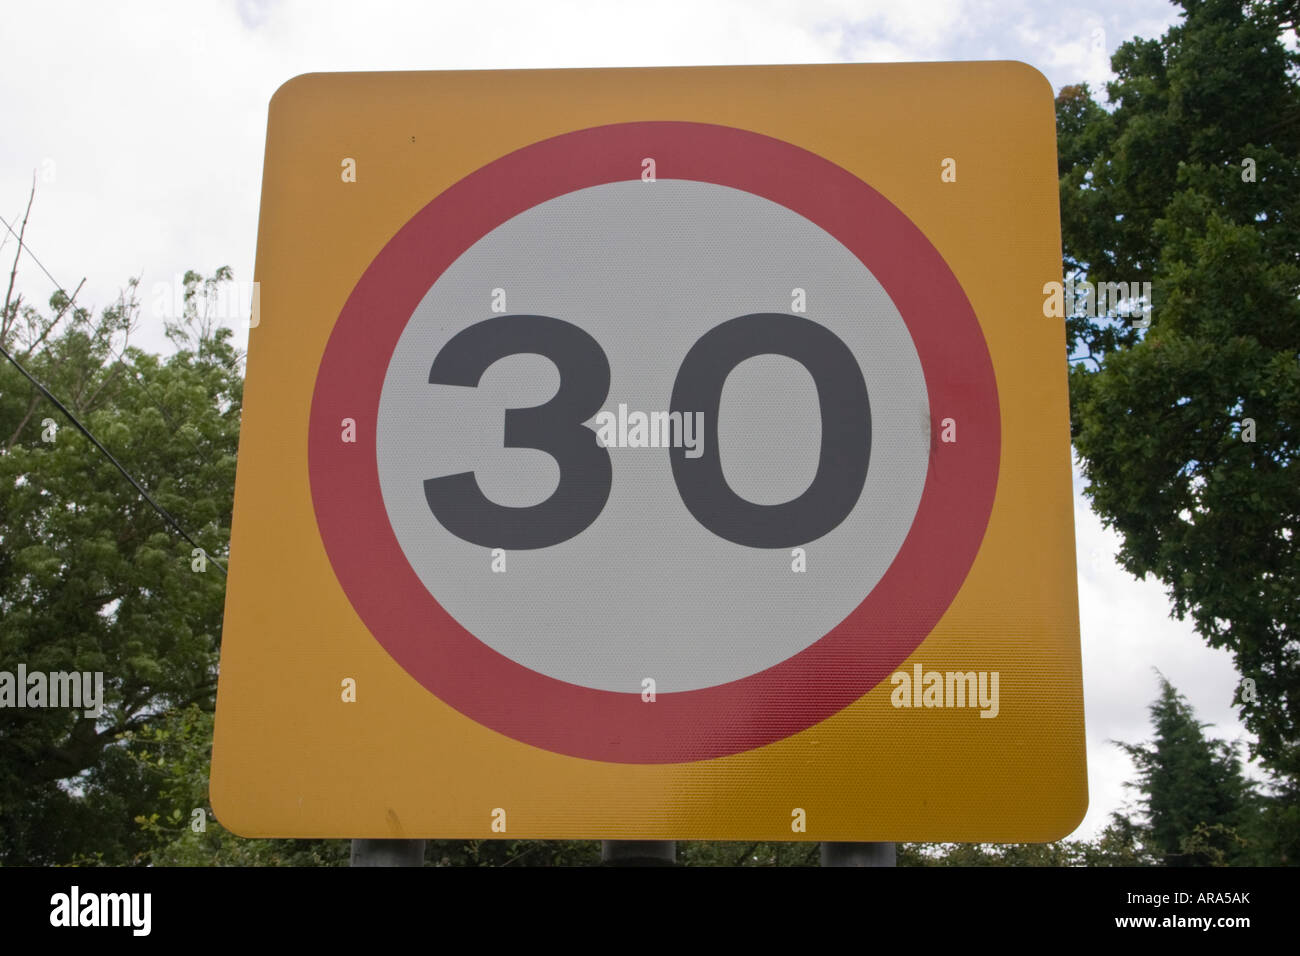 30mph speed limit road sign Stock Photo